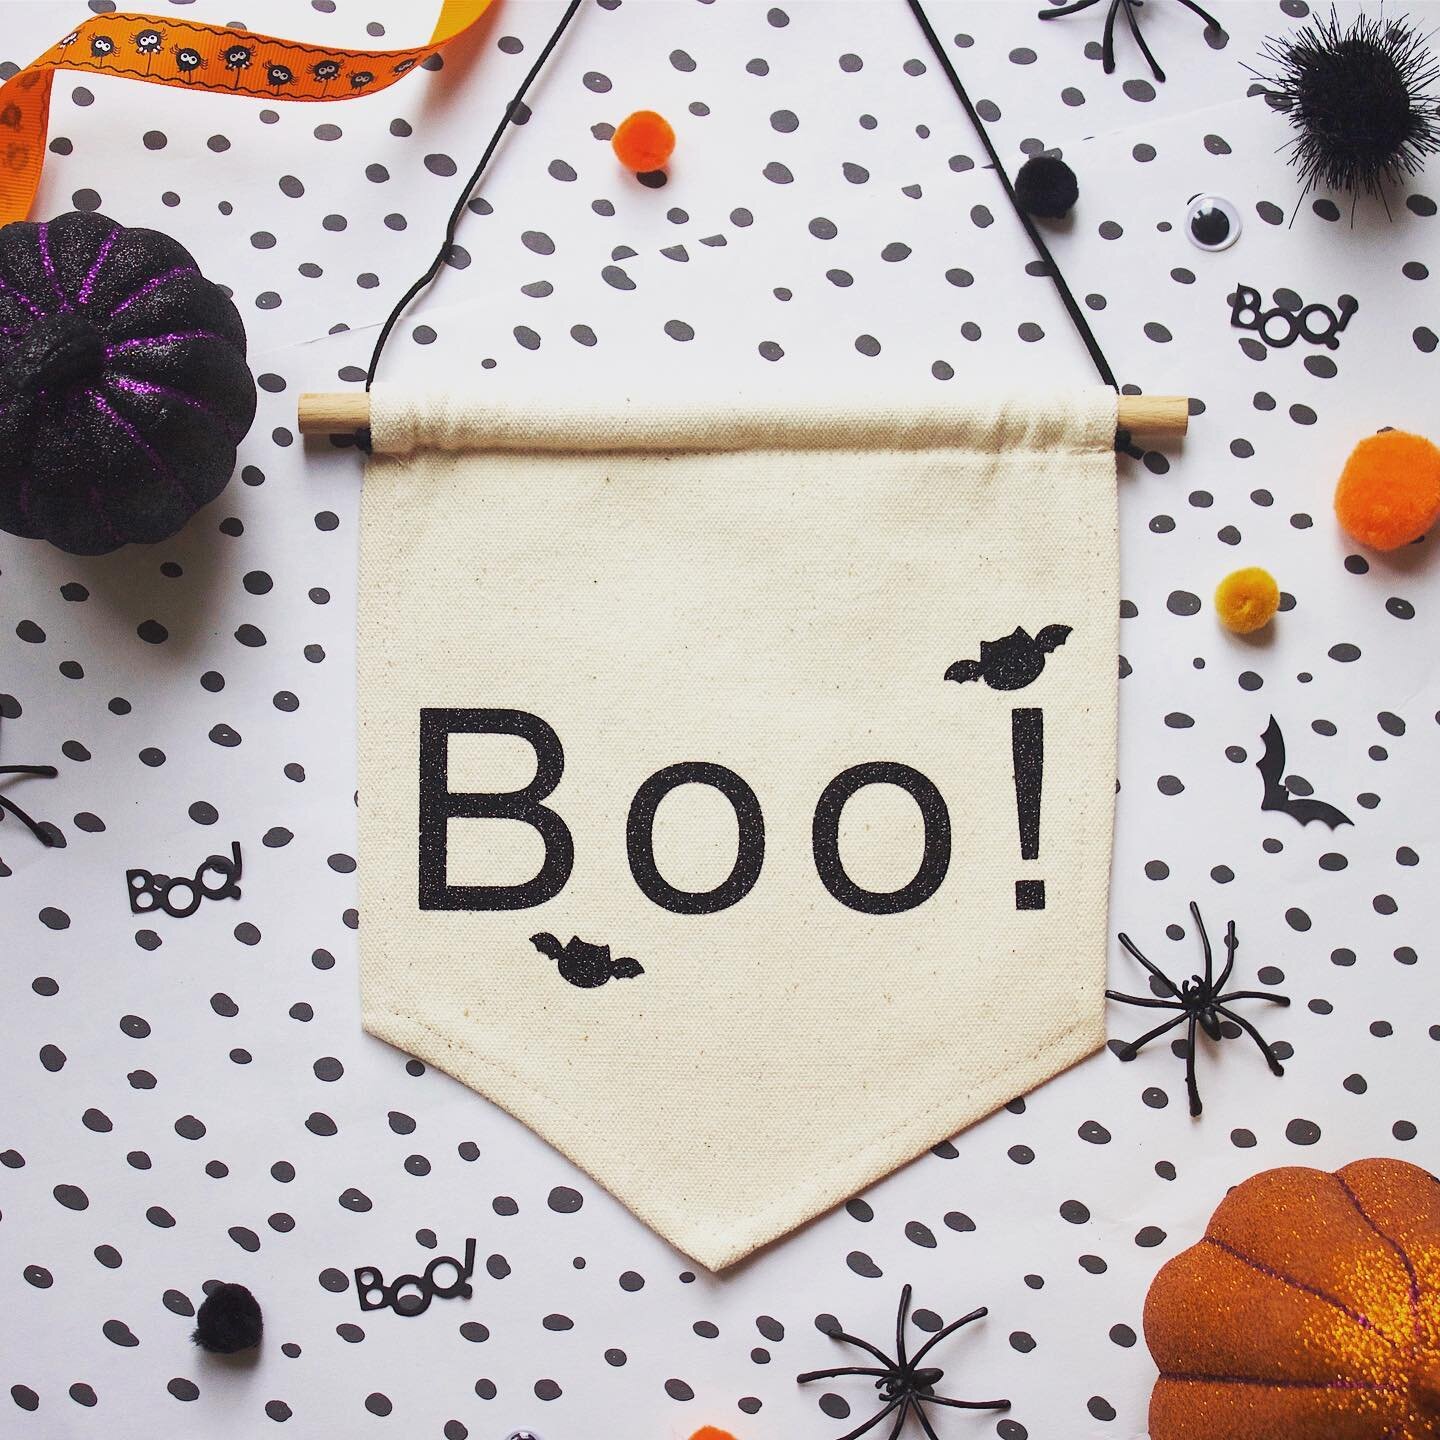 HALLOWEEN IS NOT CANCELLED!! This wall hanging is sure to bring a smile to any ones face that see's it, take photos in fancy dress, hang it in your window! And theme the heck out of this years unusual spooky day! Lovingly handmade, it's sure to be en